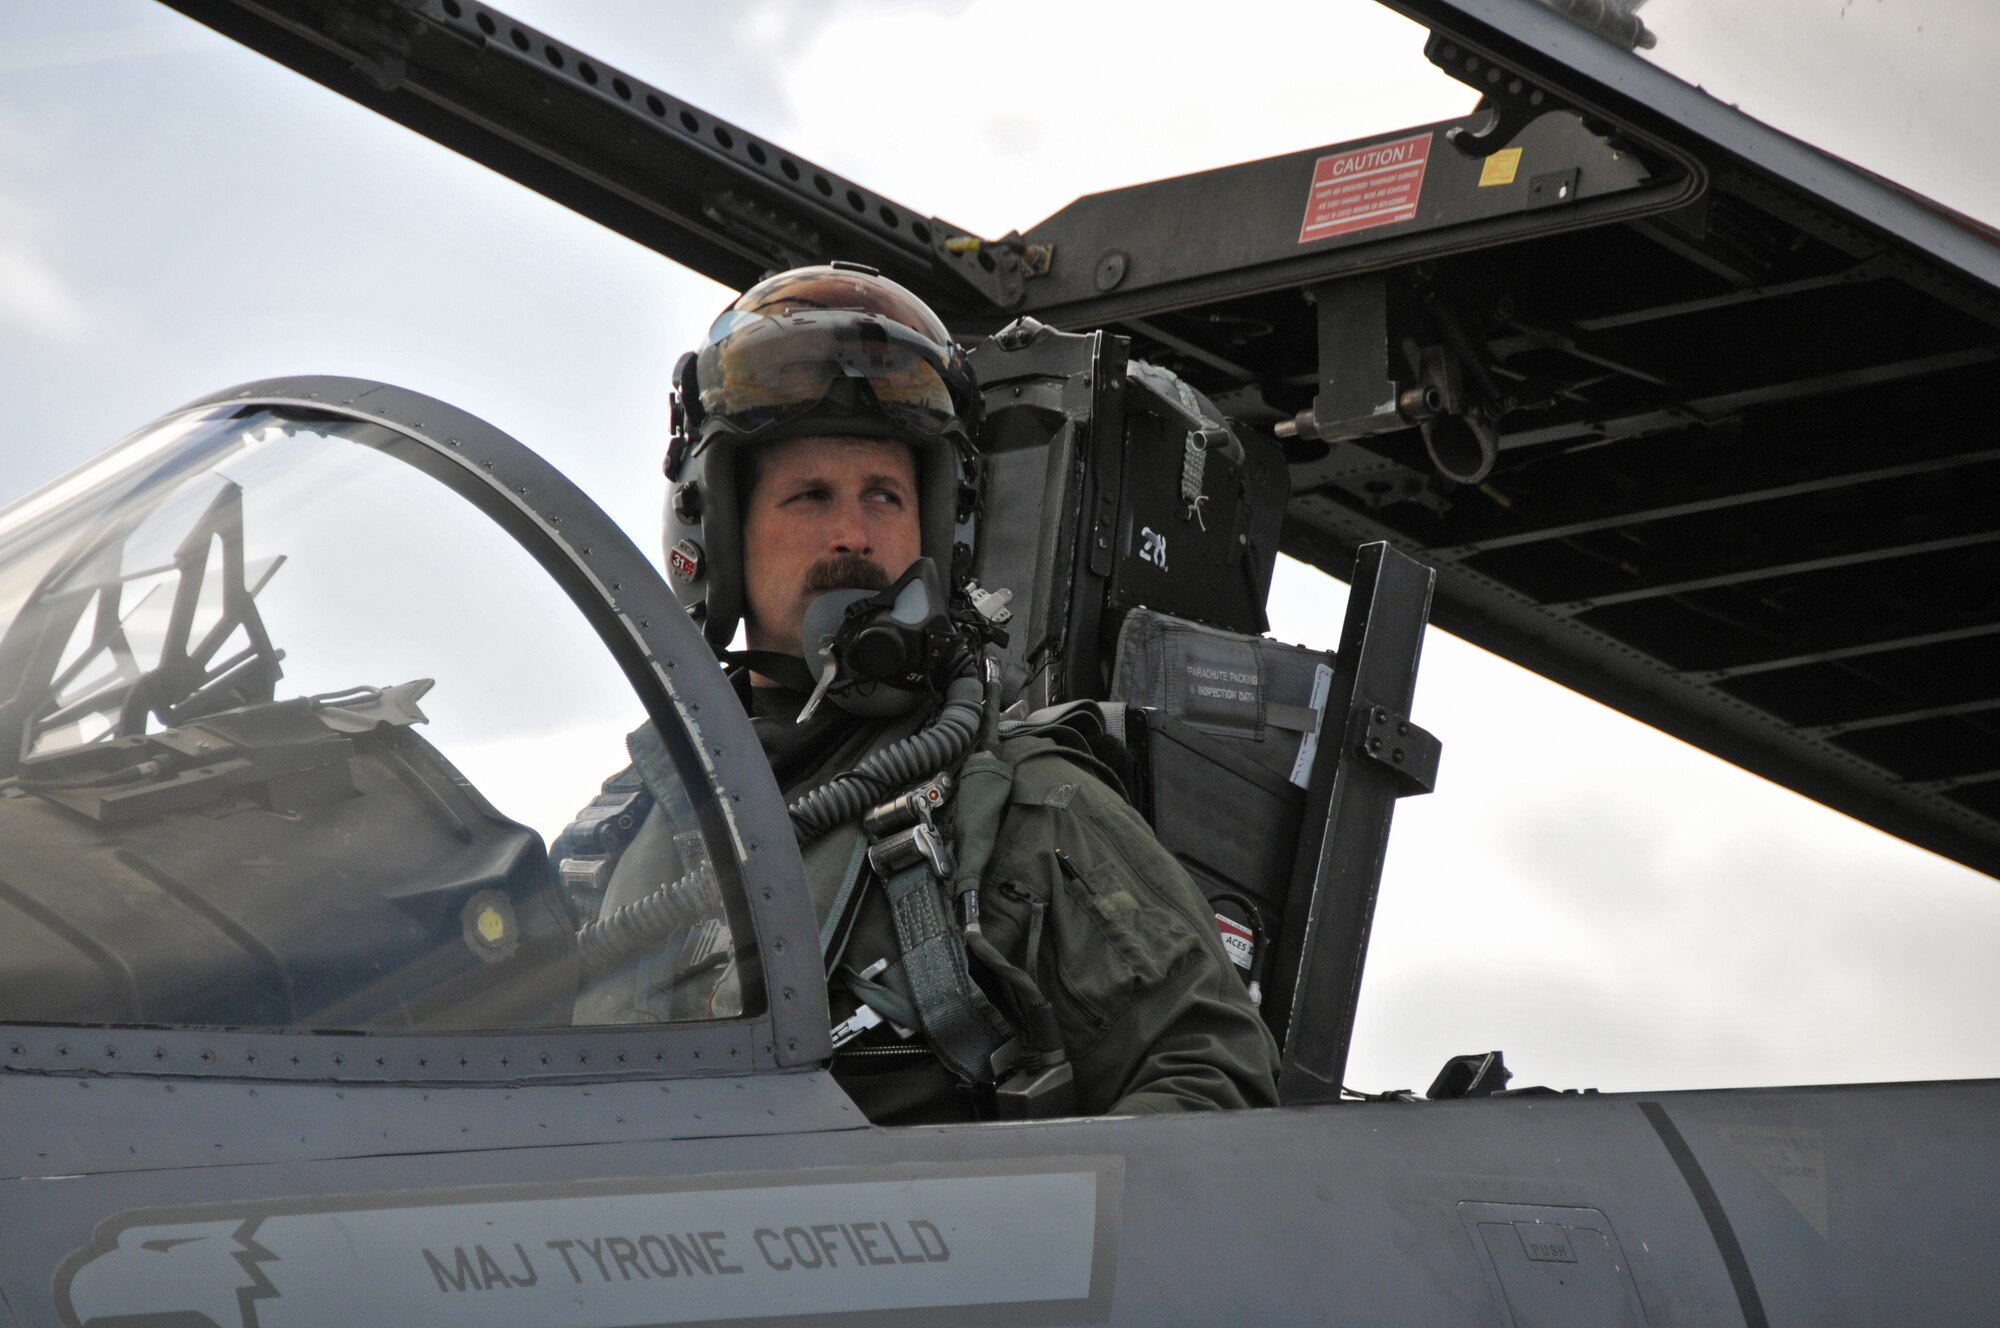 U.S. Air Force and Massachusetts Air National Guard Lt. Col. David “Moon” Halasi-Kun, 131st Expeditionary Fighter Squadron detachment commander, prepares for his mission in an F-15C Eagle, April 20, 2016.  The 131st EFS is participating in the Royal Netherlands Air Force Frisian Flag 2016 exercise, Leeuwarden Air Base, Netherlands.  The exercise runs from April 11-22 and is comprised of more than 70 aircraft and several hundred personnel from the United States, Netherlands, Belgium, France, Finland, Poland, Norway, United Kingdom, Germany and Australia. (U.S. Air National Guard photo by 1st Lt. Anthony Mutti /Released)
